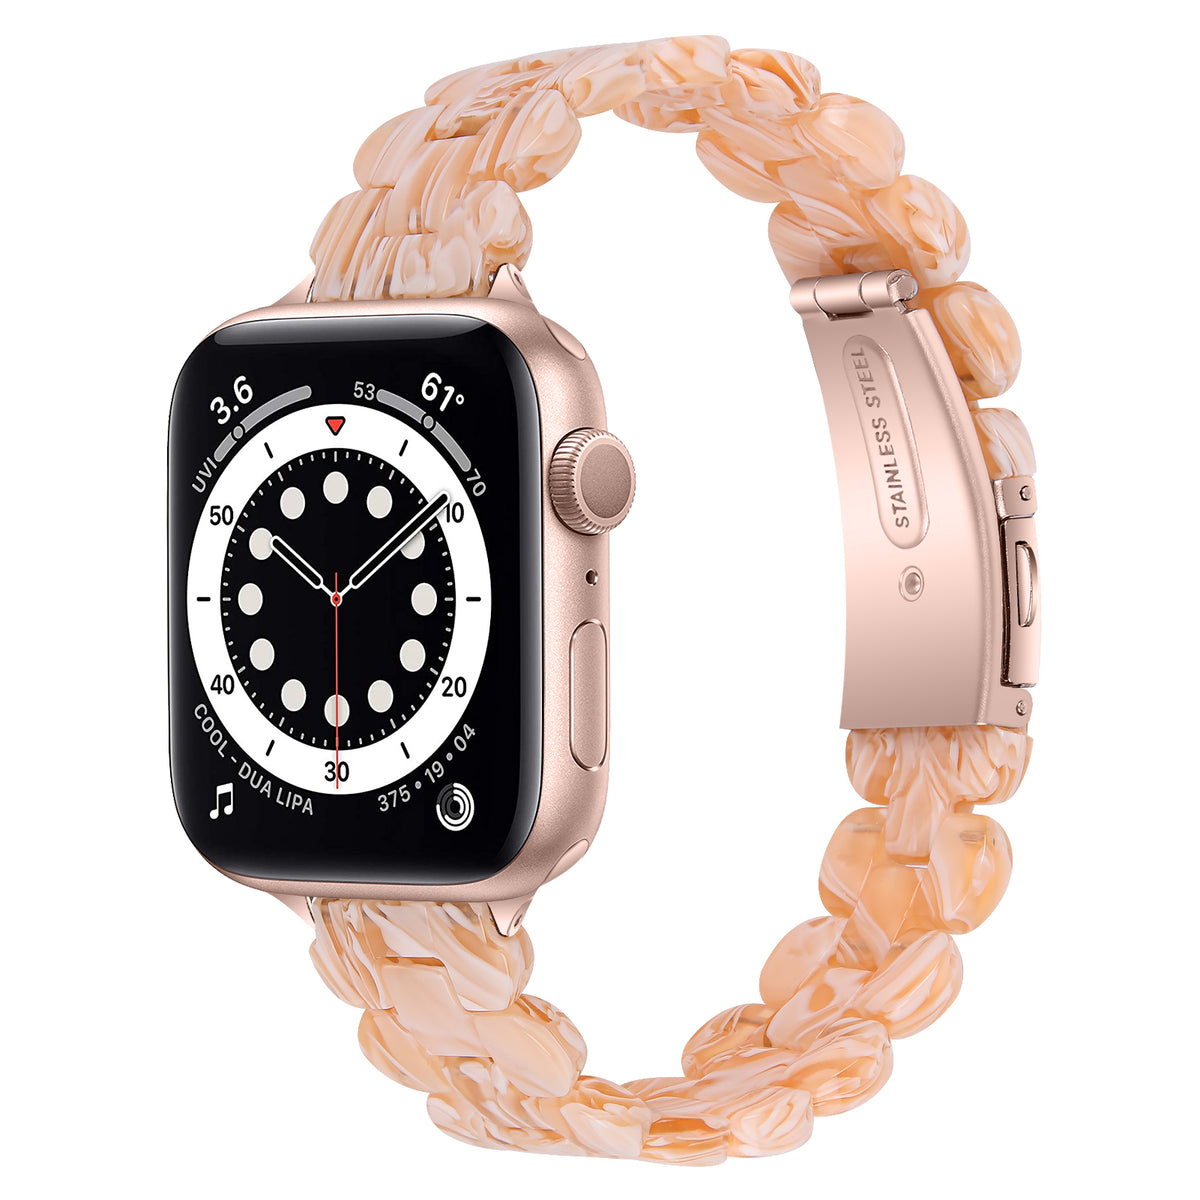 TEEPOLLO Cute Resin Unique Apple Watch Iwatch Iphone Band for Girl